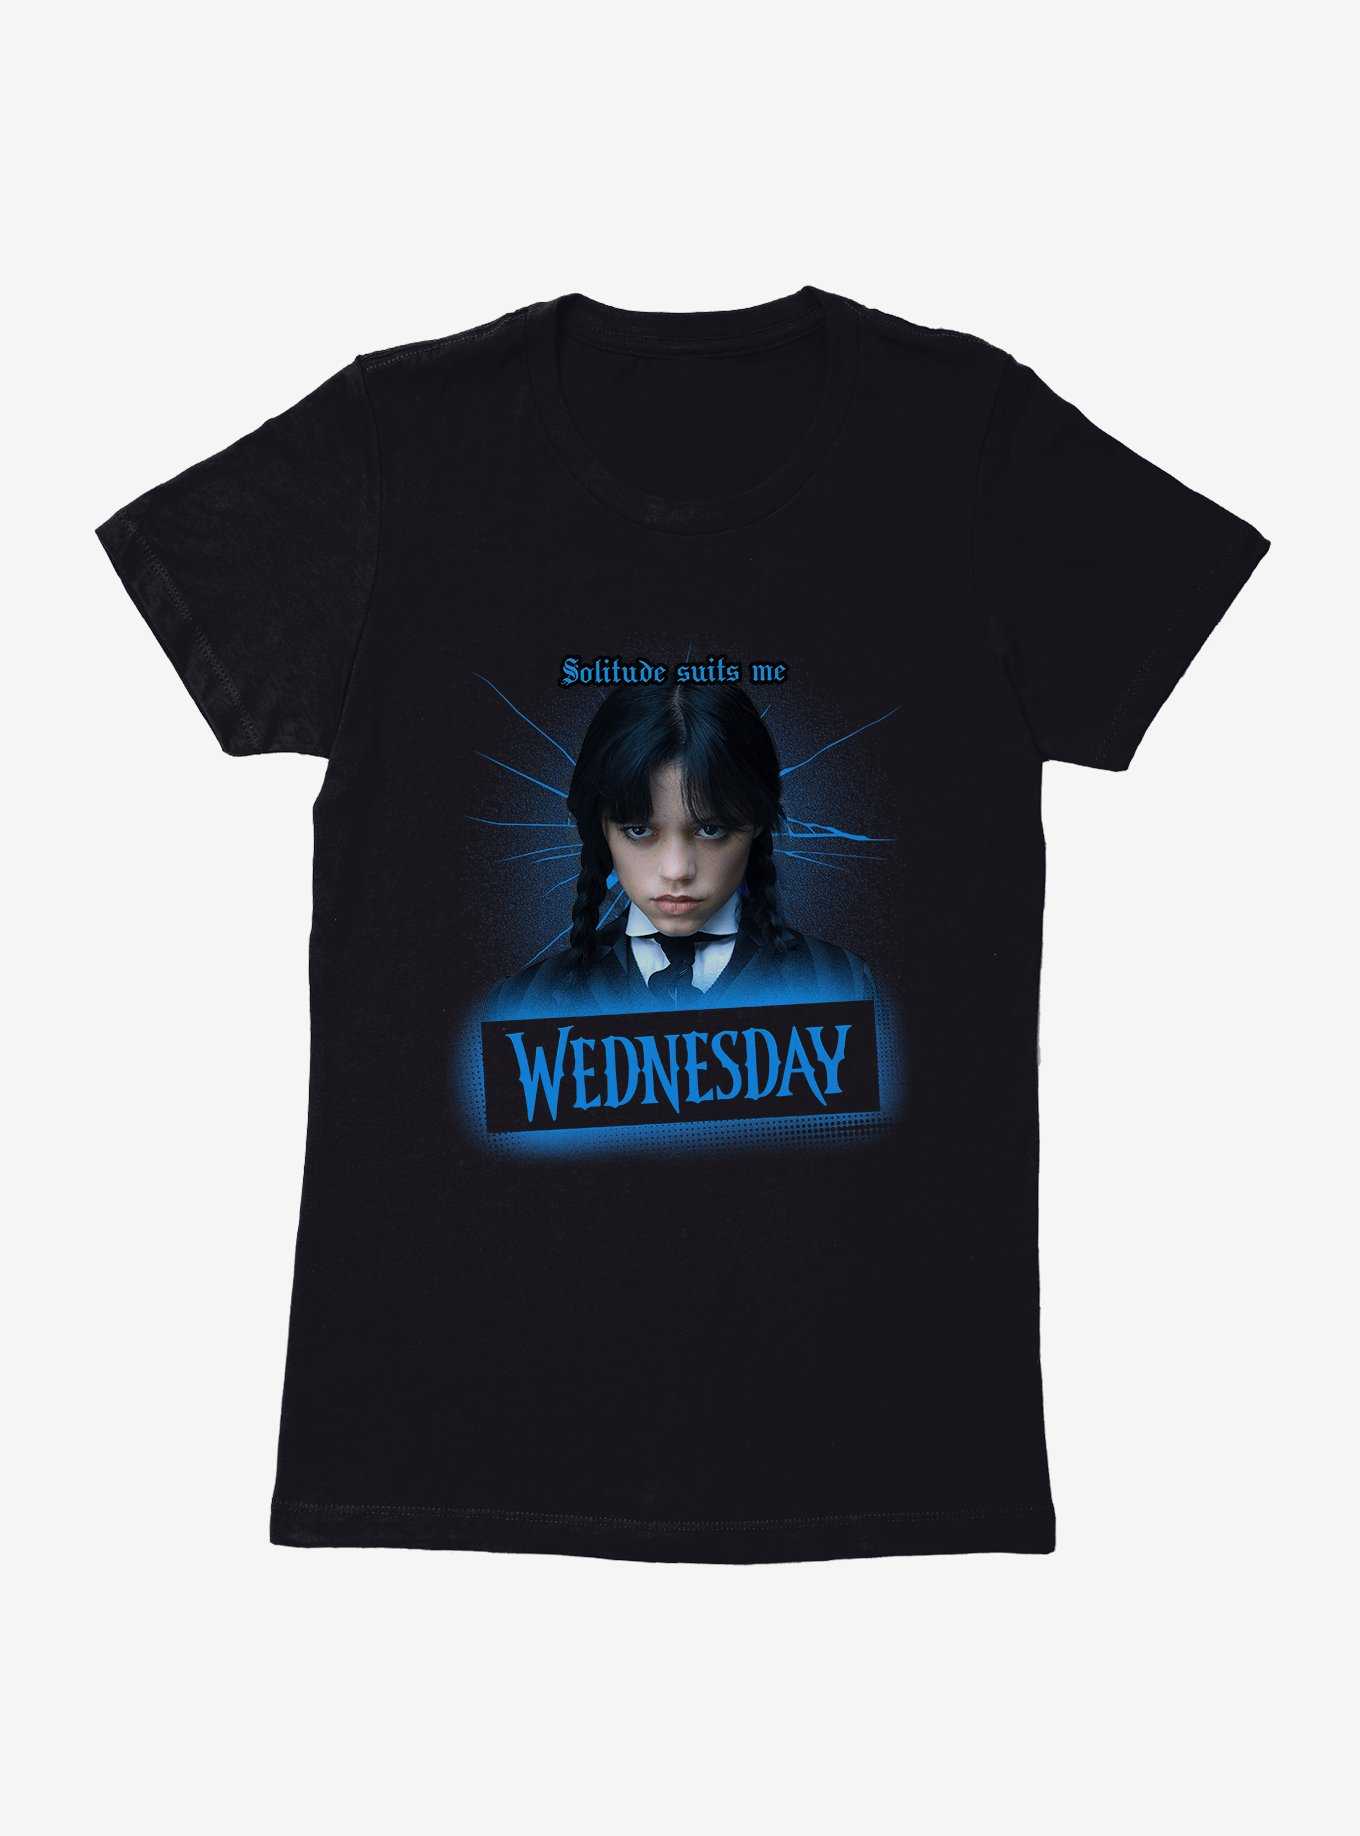 Wednesday Solitude Suits Me Womens T-Shirt, , hi-res